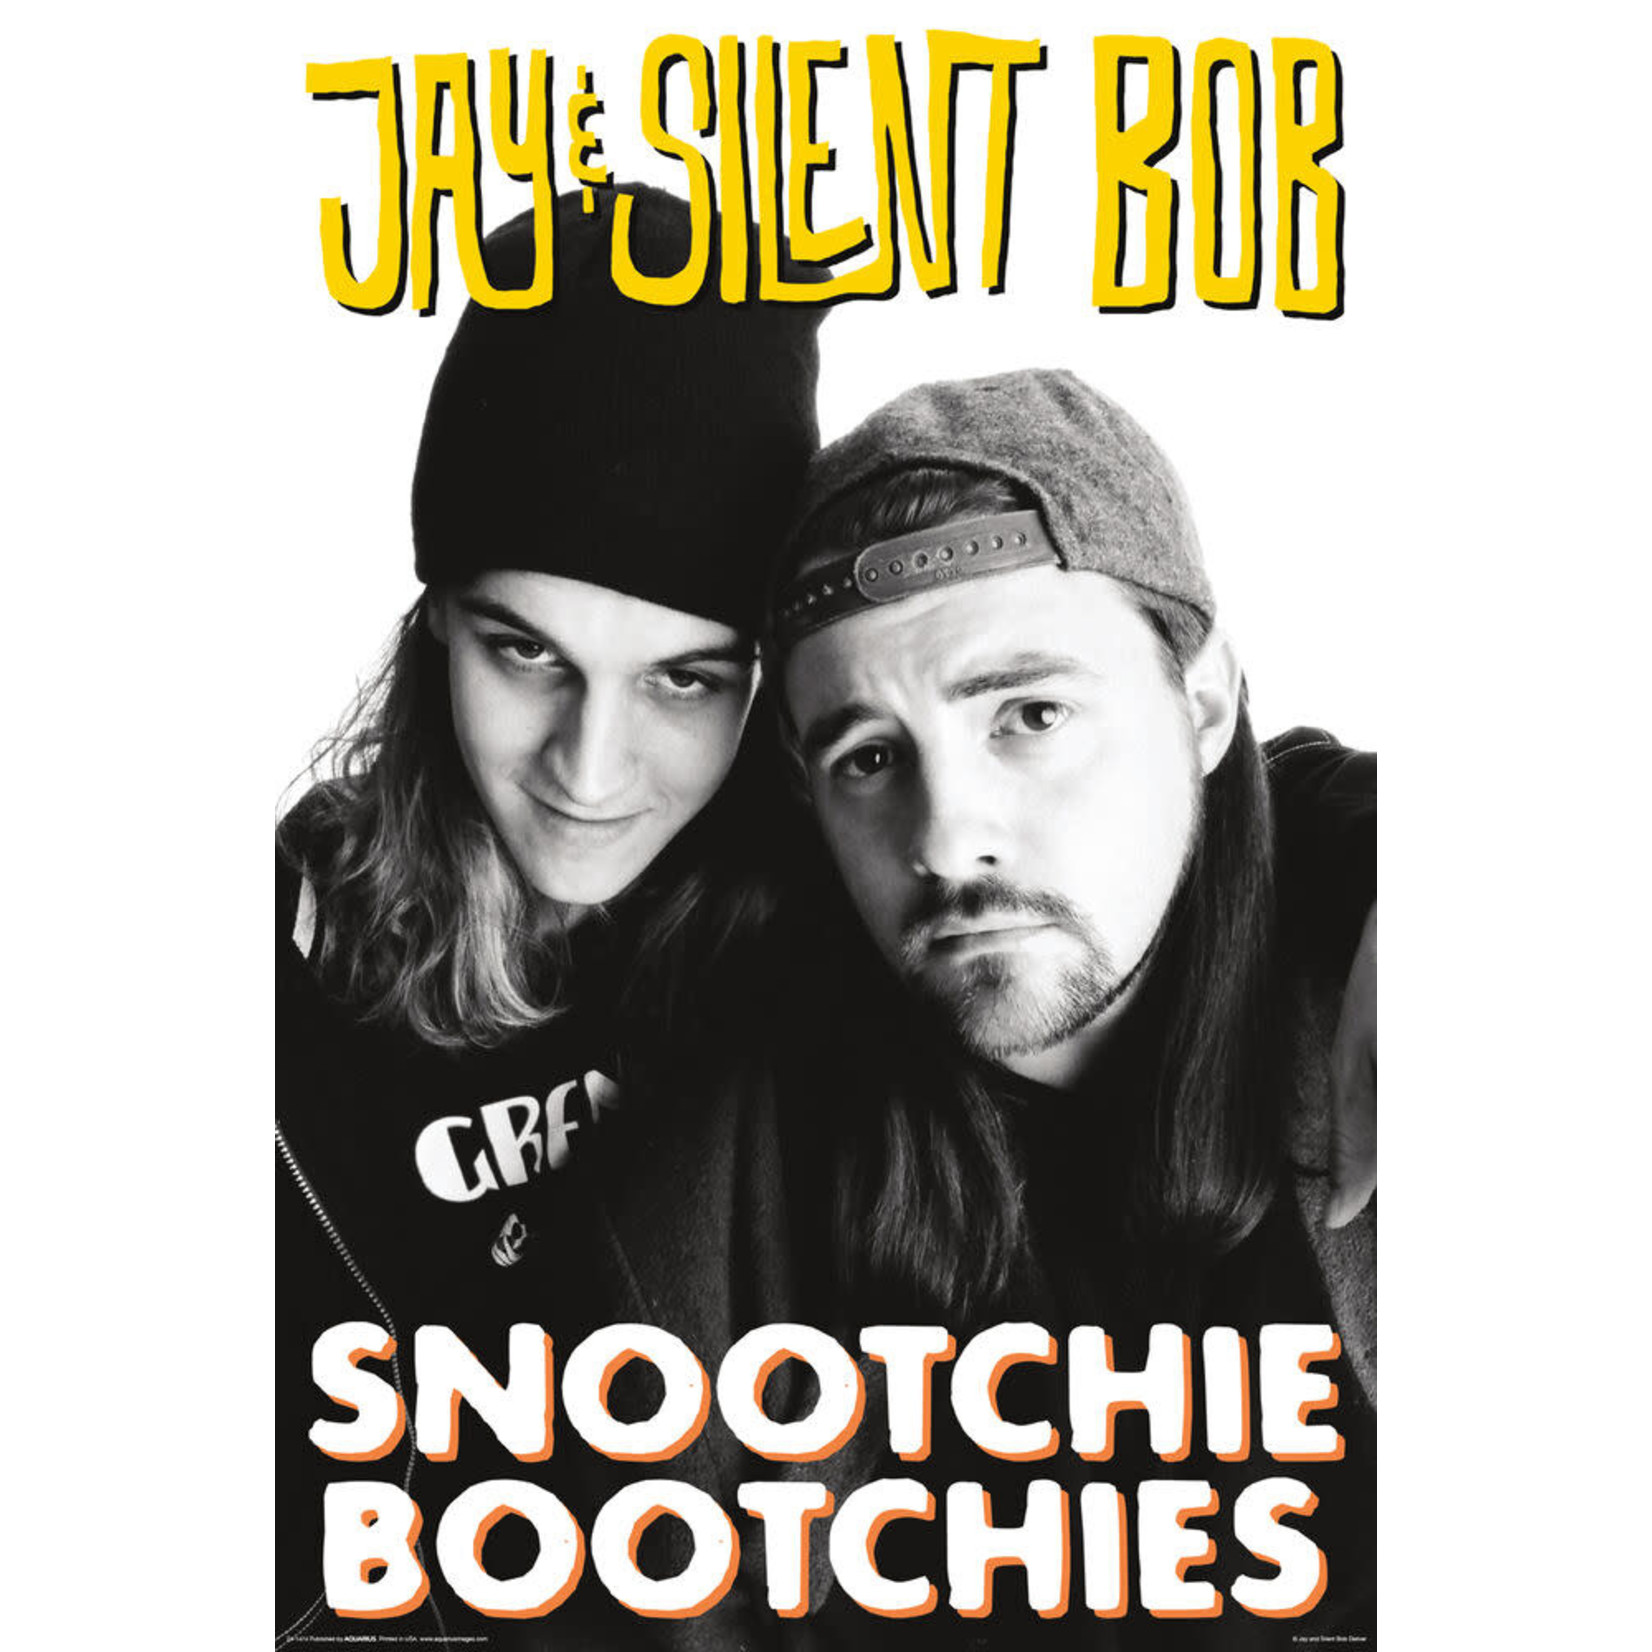 Poster - Jay & Silent Bob: Snootchie Bootchies